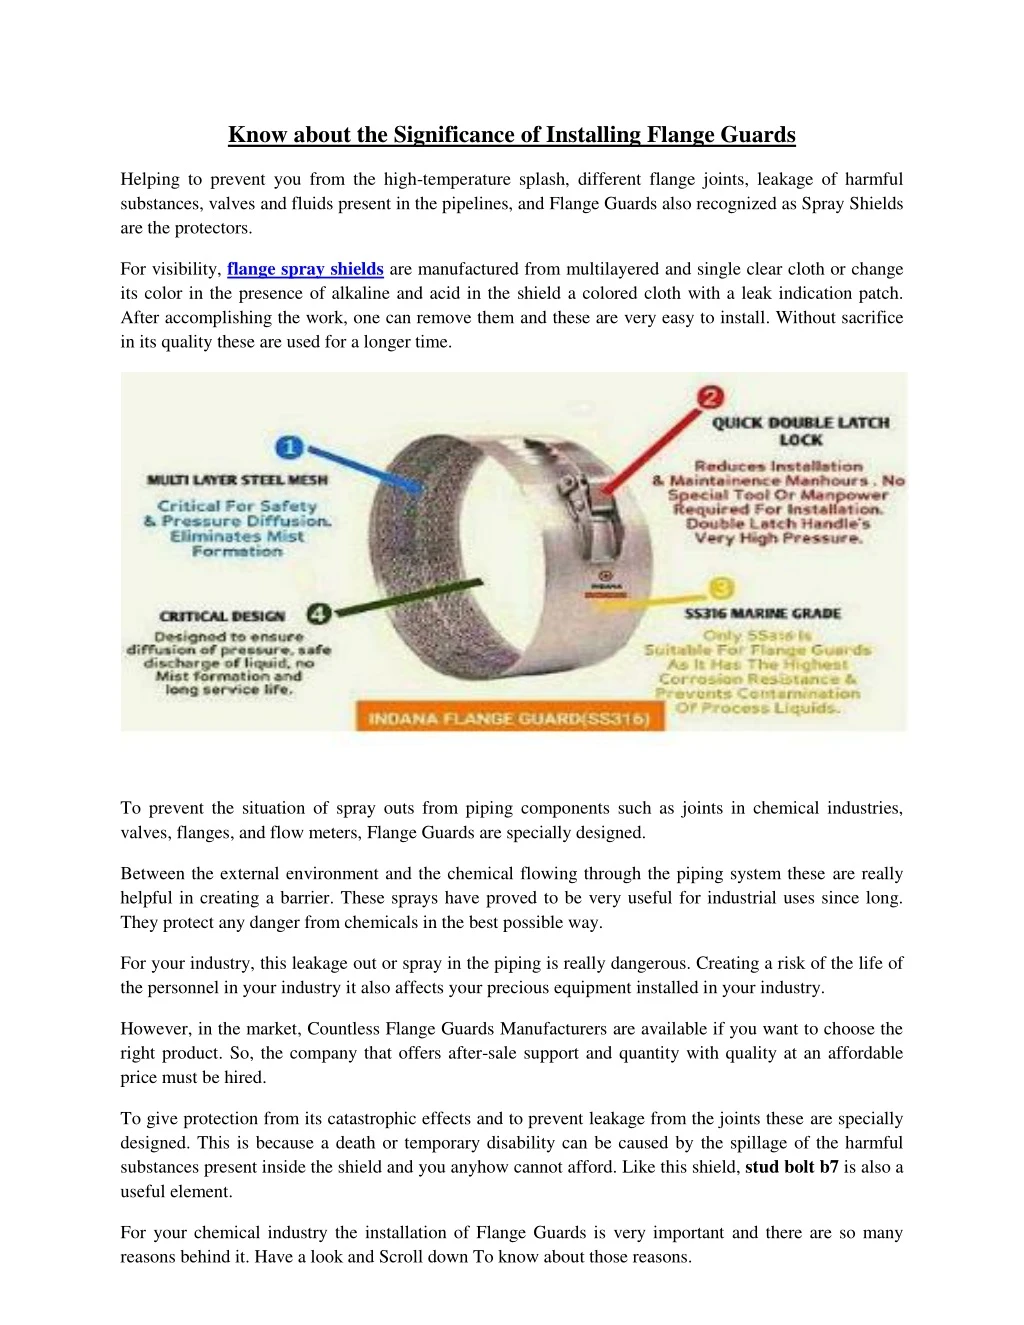 know about the significance of installing flange